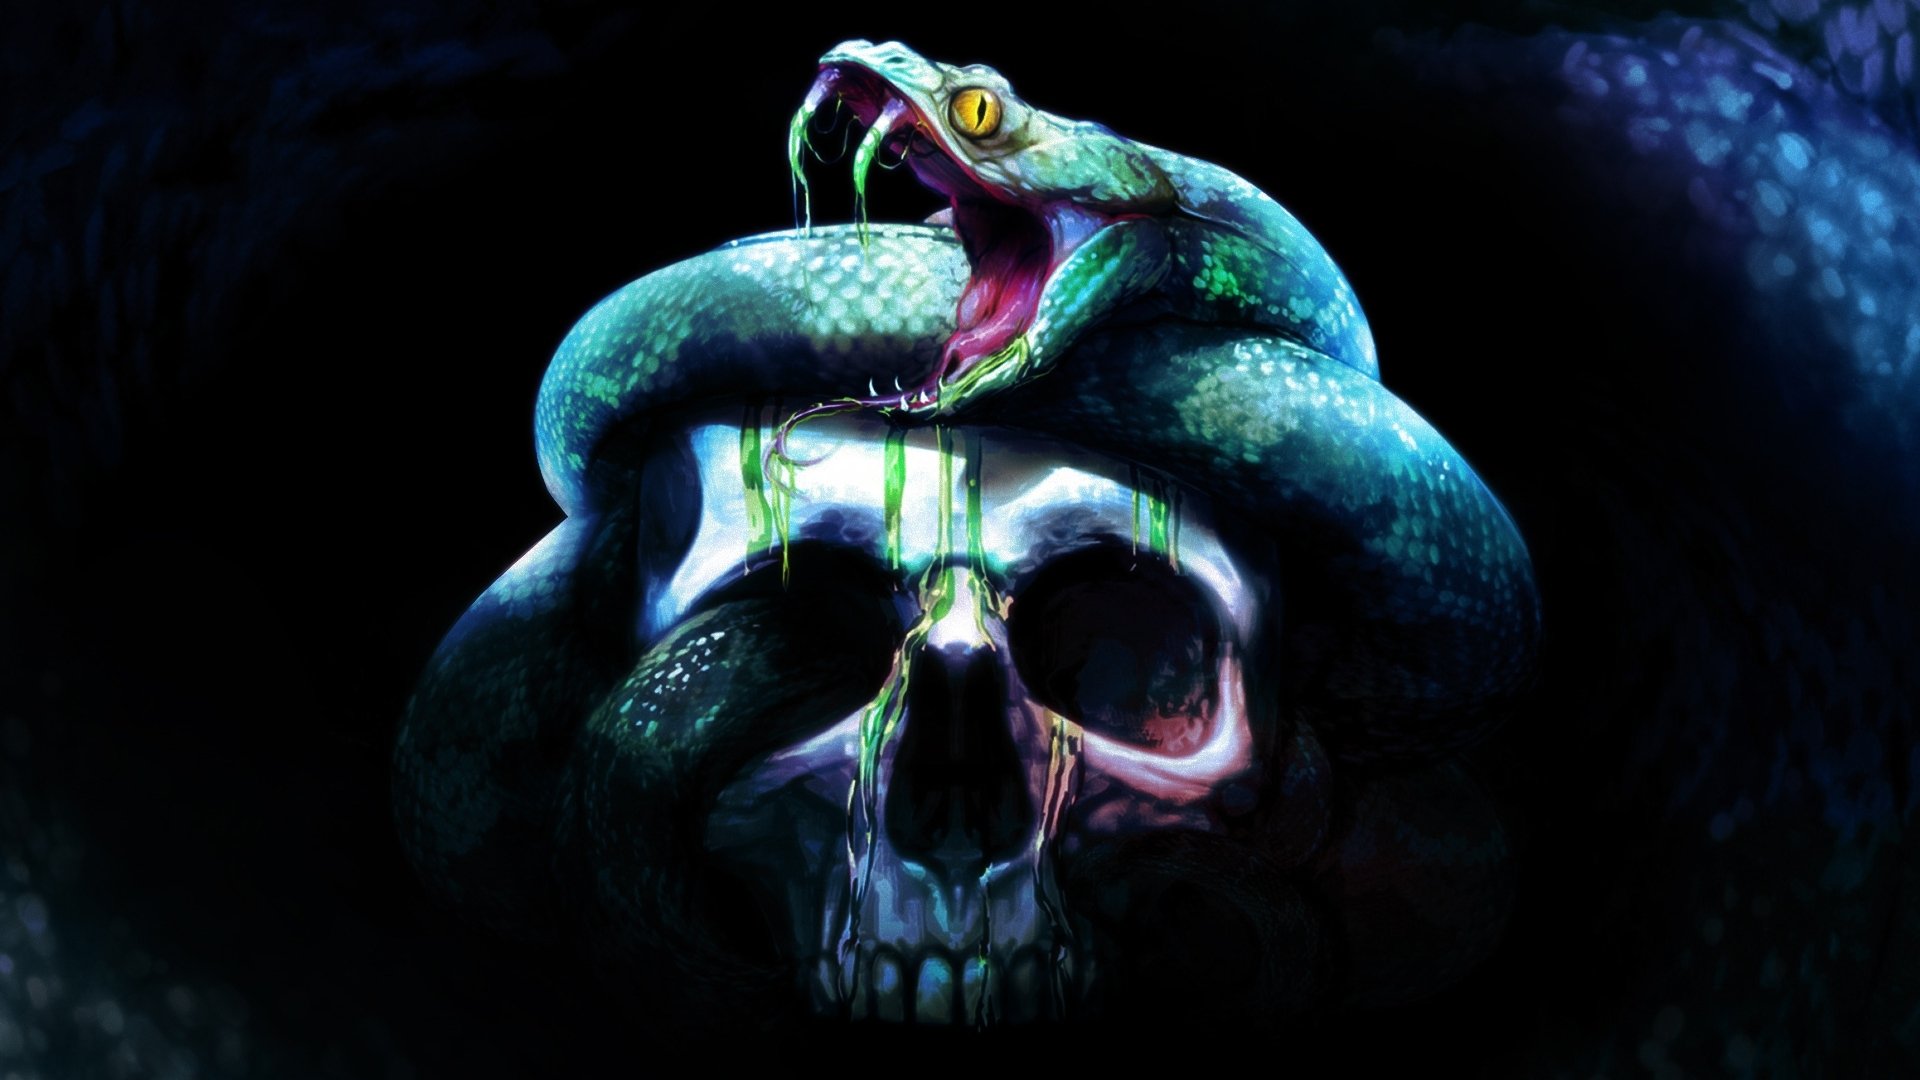 Skull and Snake Intertwined HD Wallpaper Background